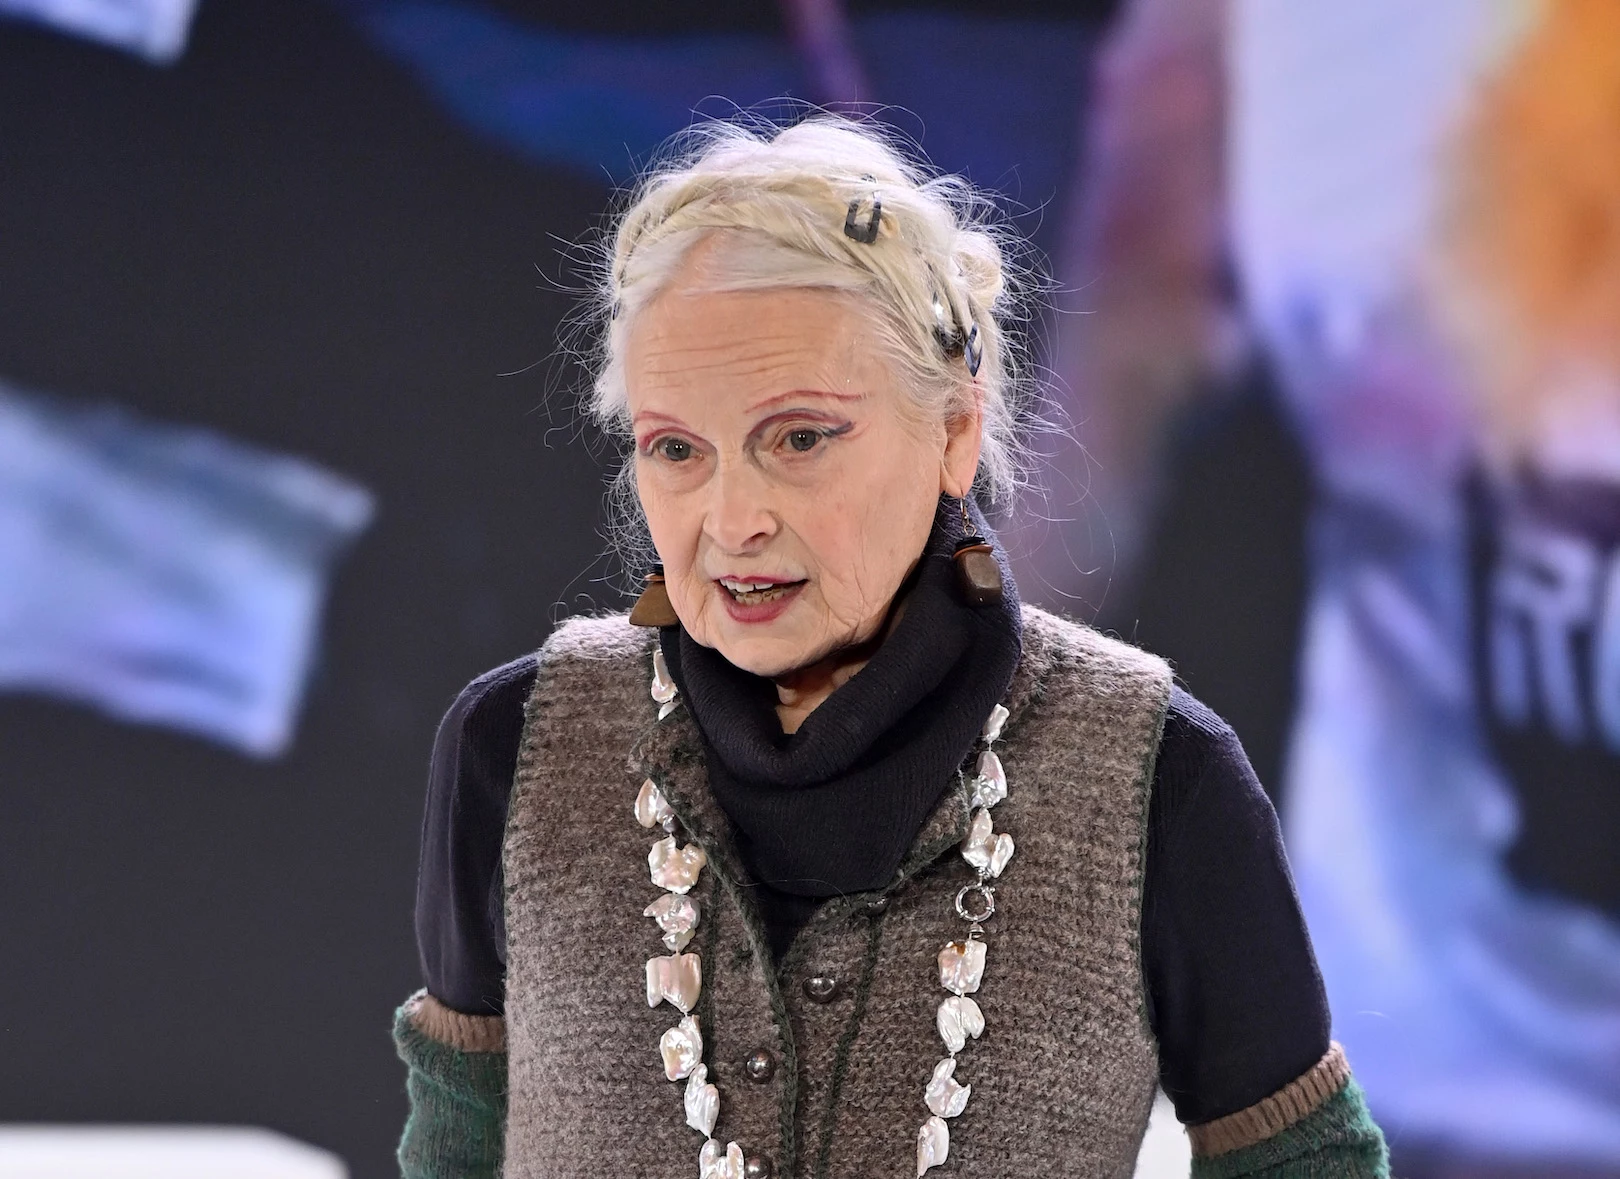 Who Is Vivienne Westwood? Here Are 5 Things About Designer Dead At